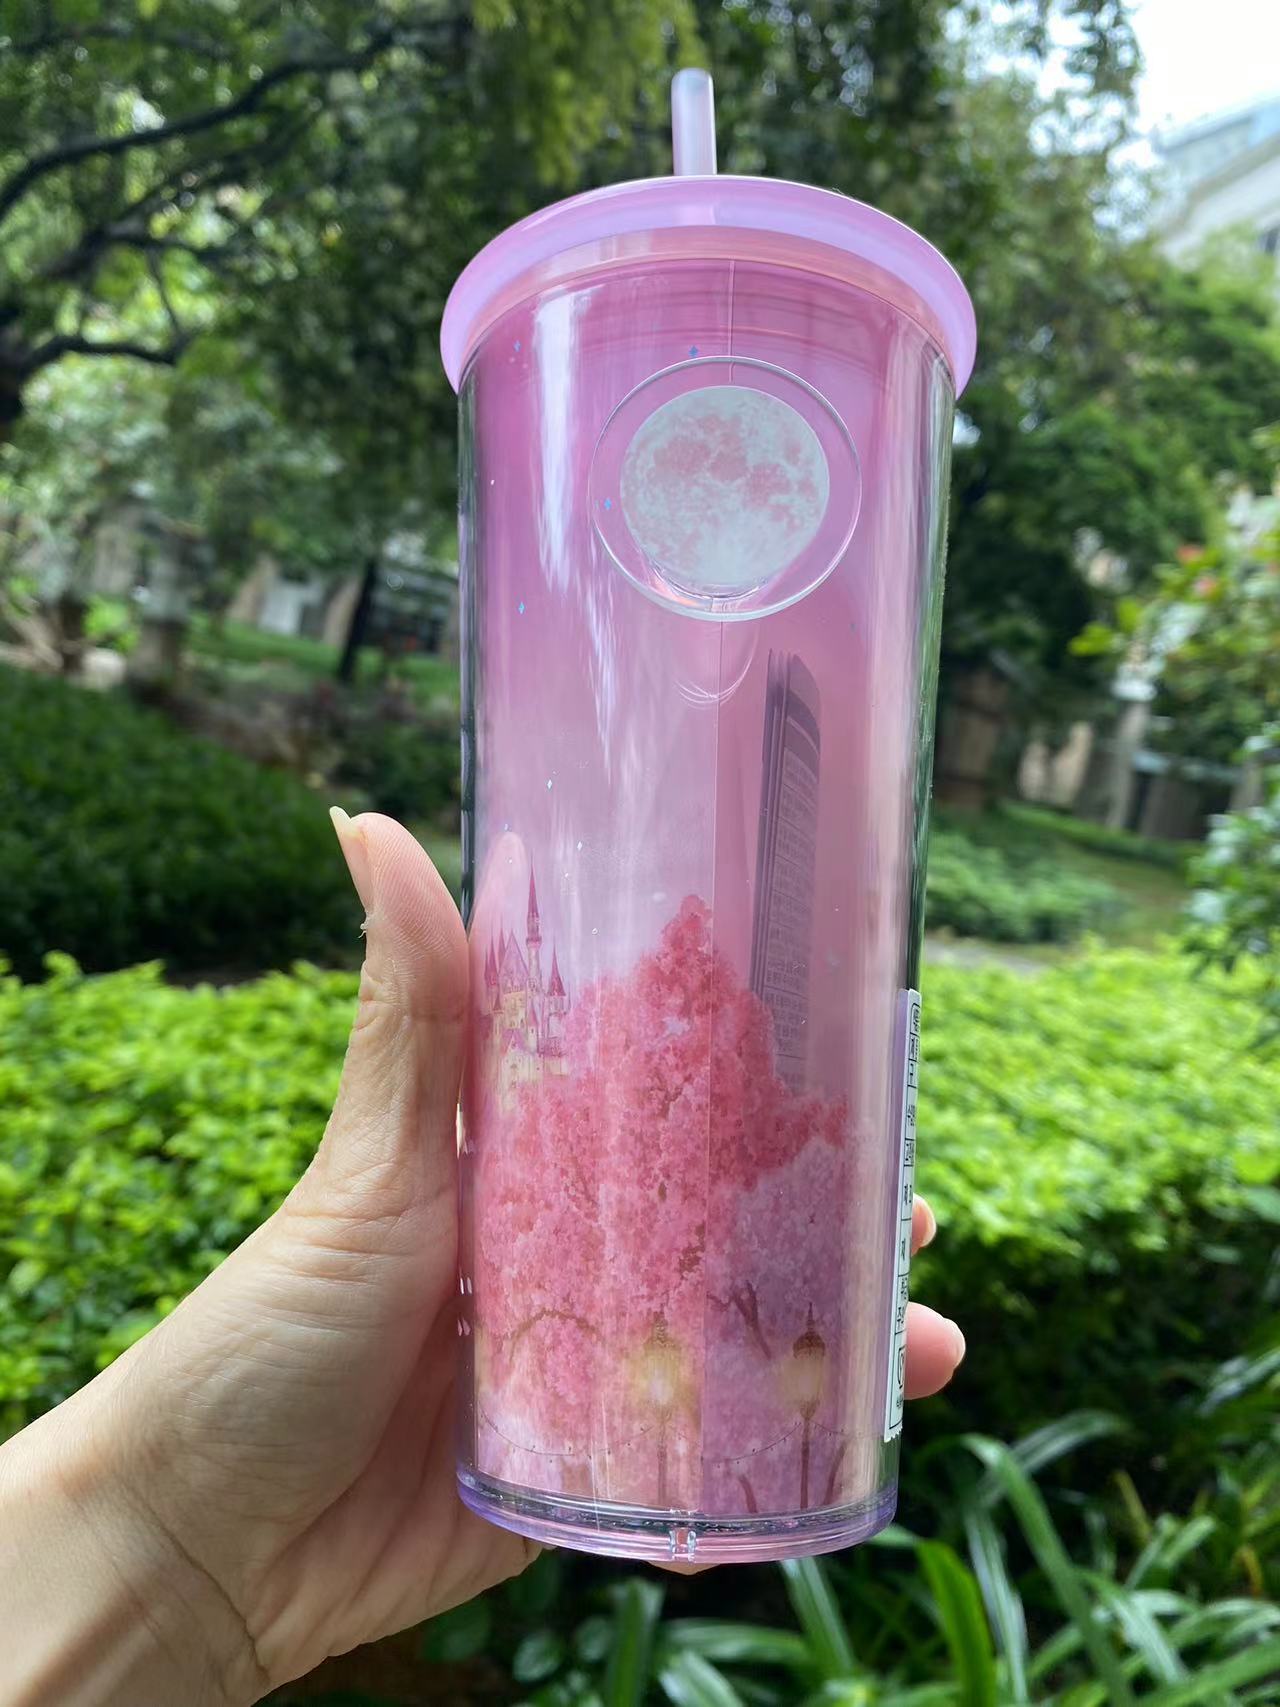 Starbucks Spring Blossom Millennial Pink Cold Cup